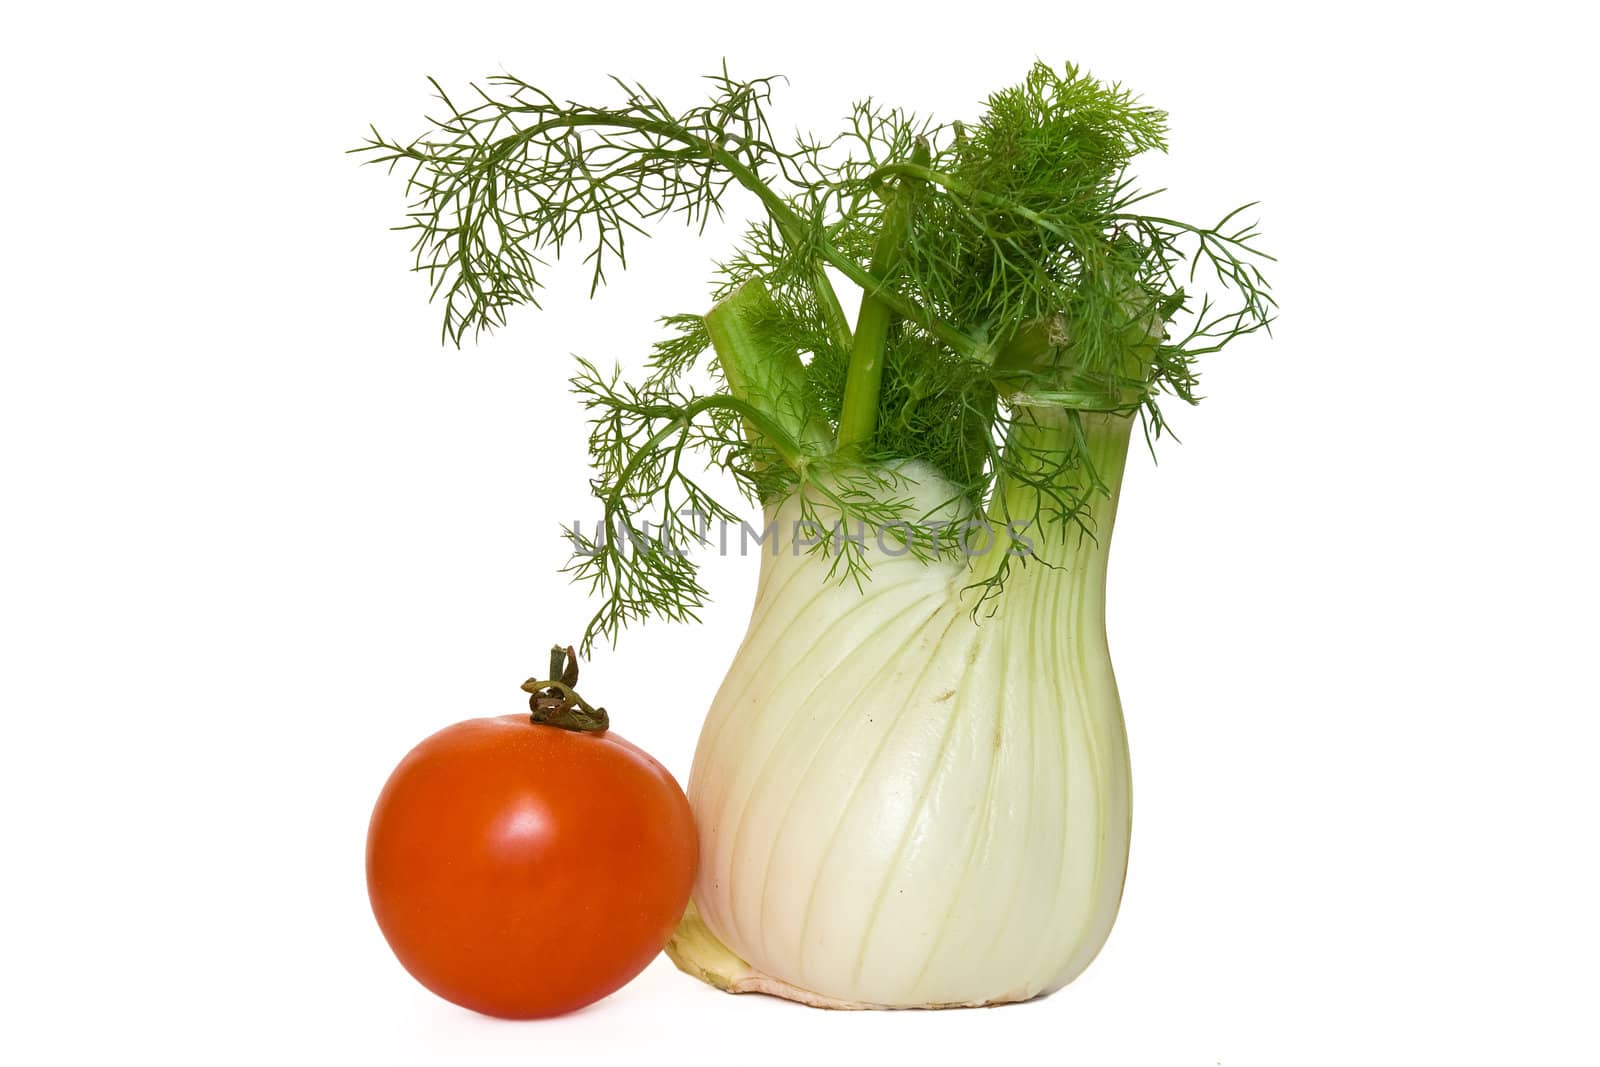 tomato and fennel isolated on white background